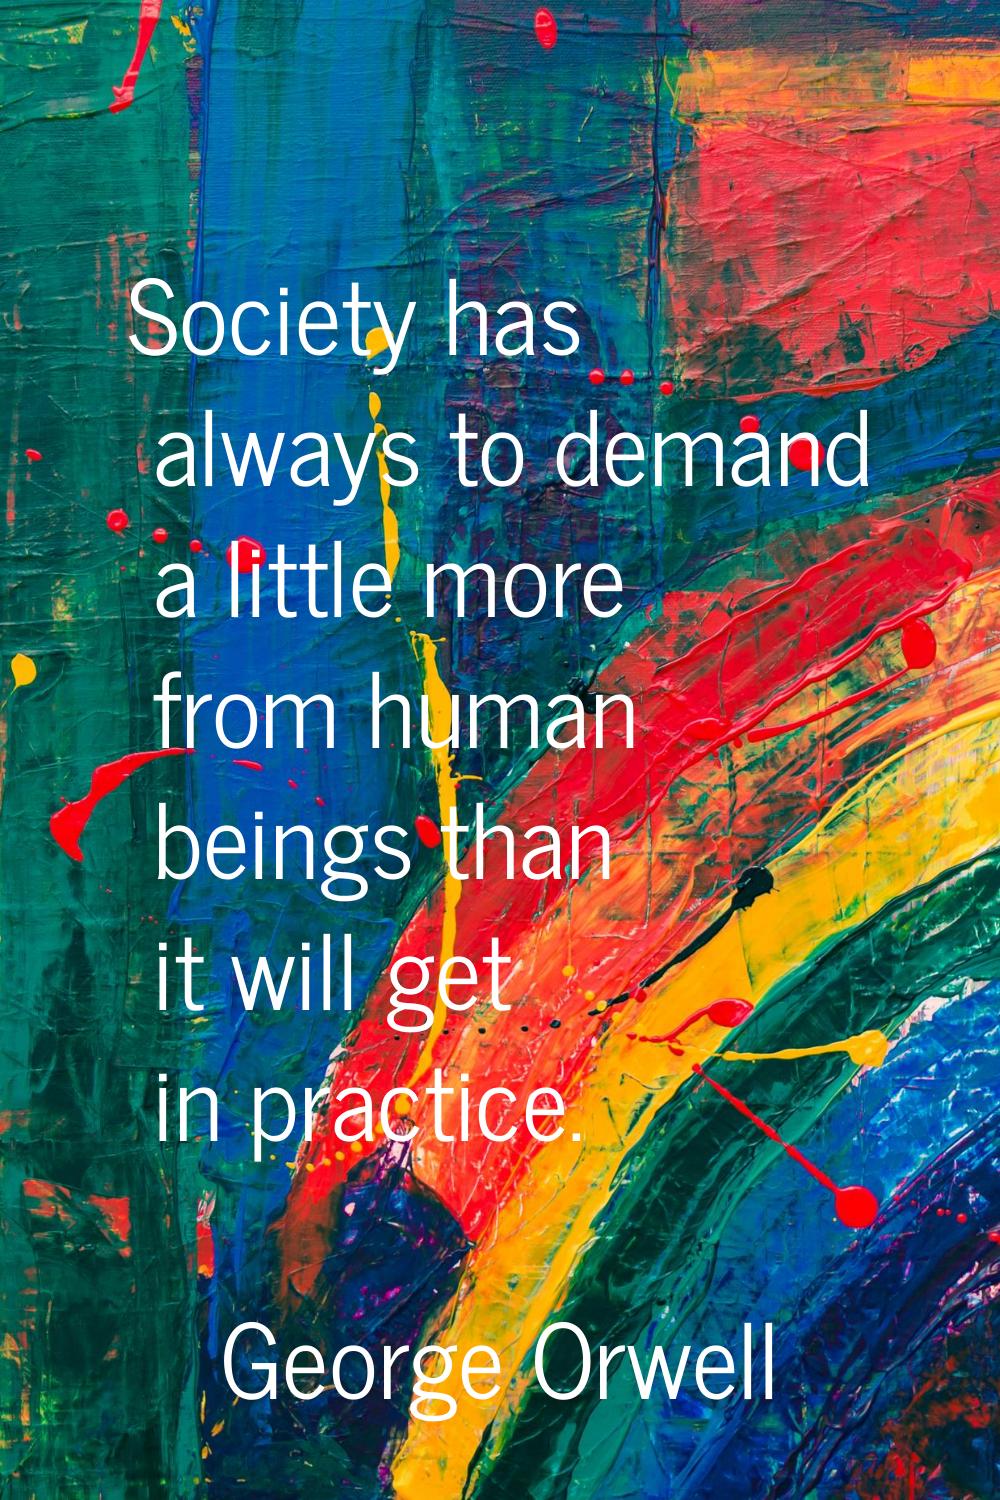 Society has always to demand a little more from human beings than it will get in practice.